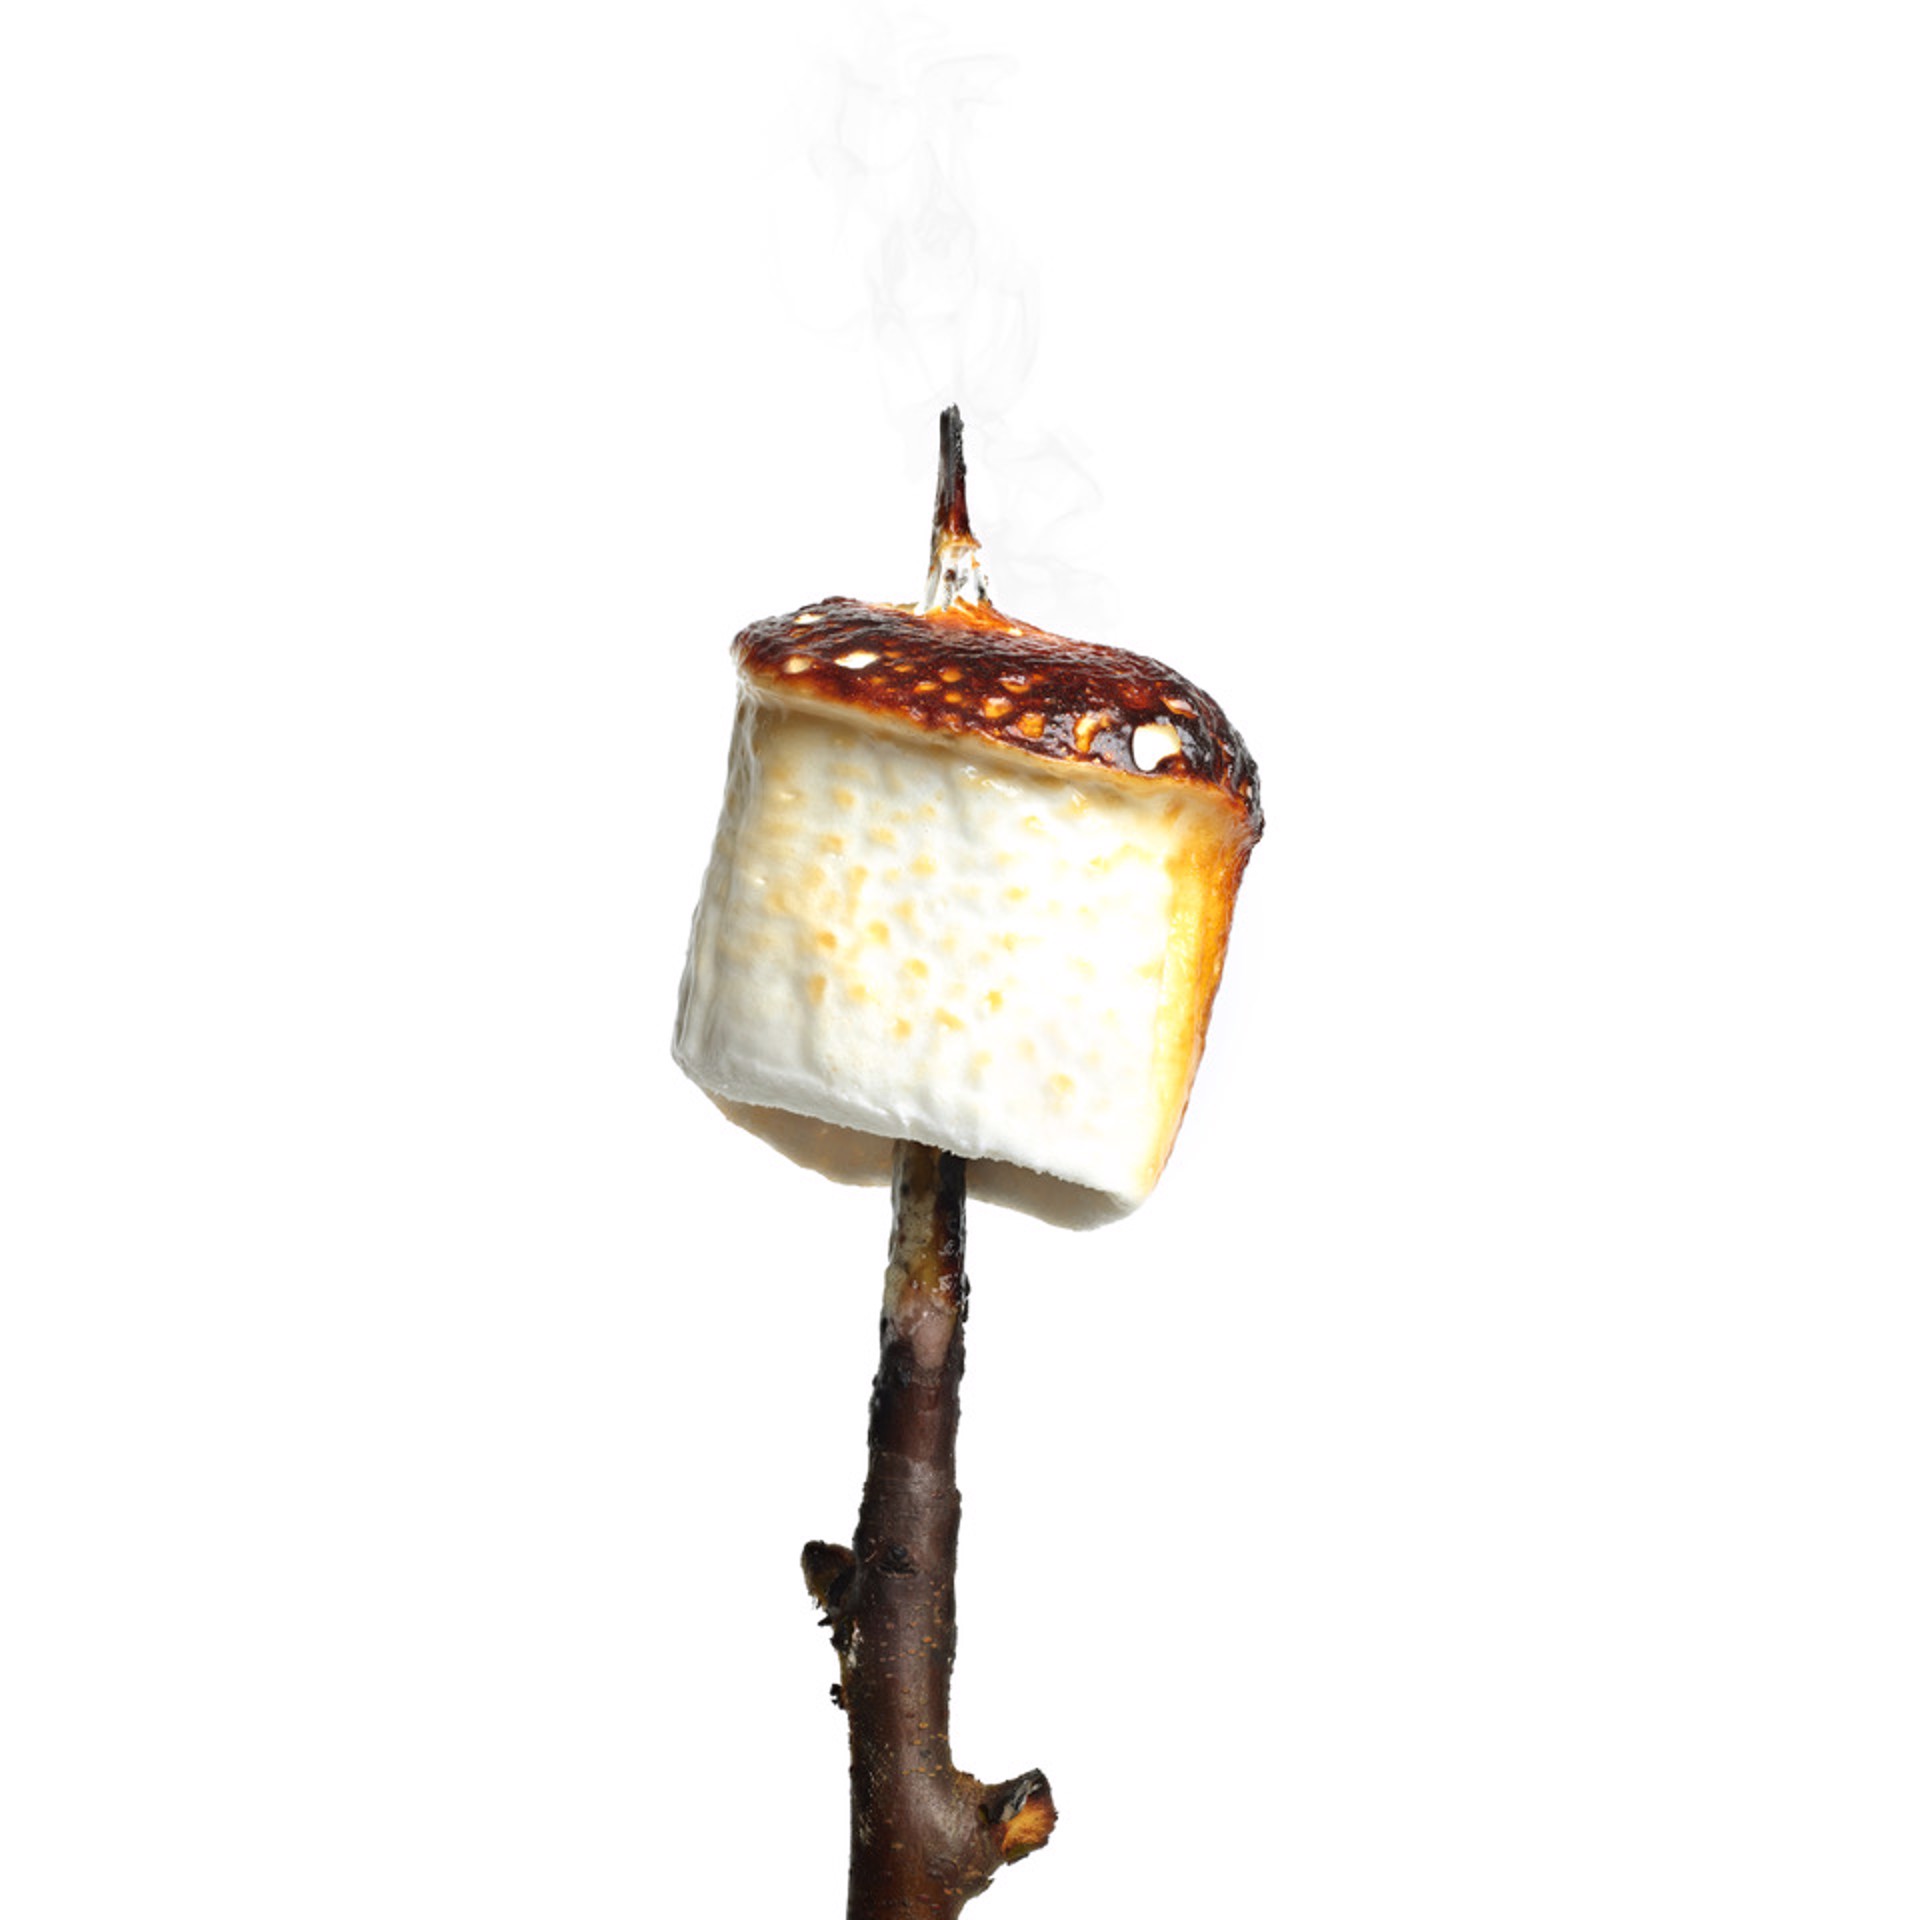 Marshmallow by Peter Andrew Lusztyk / Refined Sugar